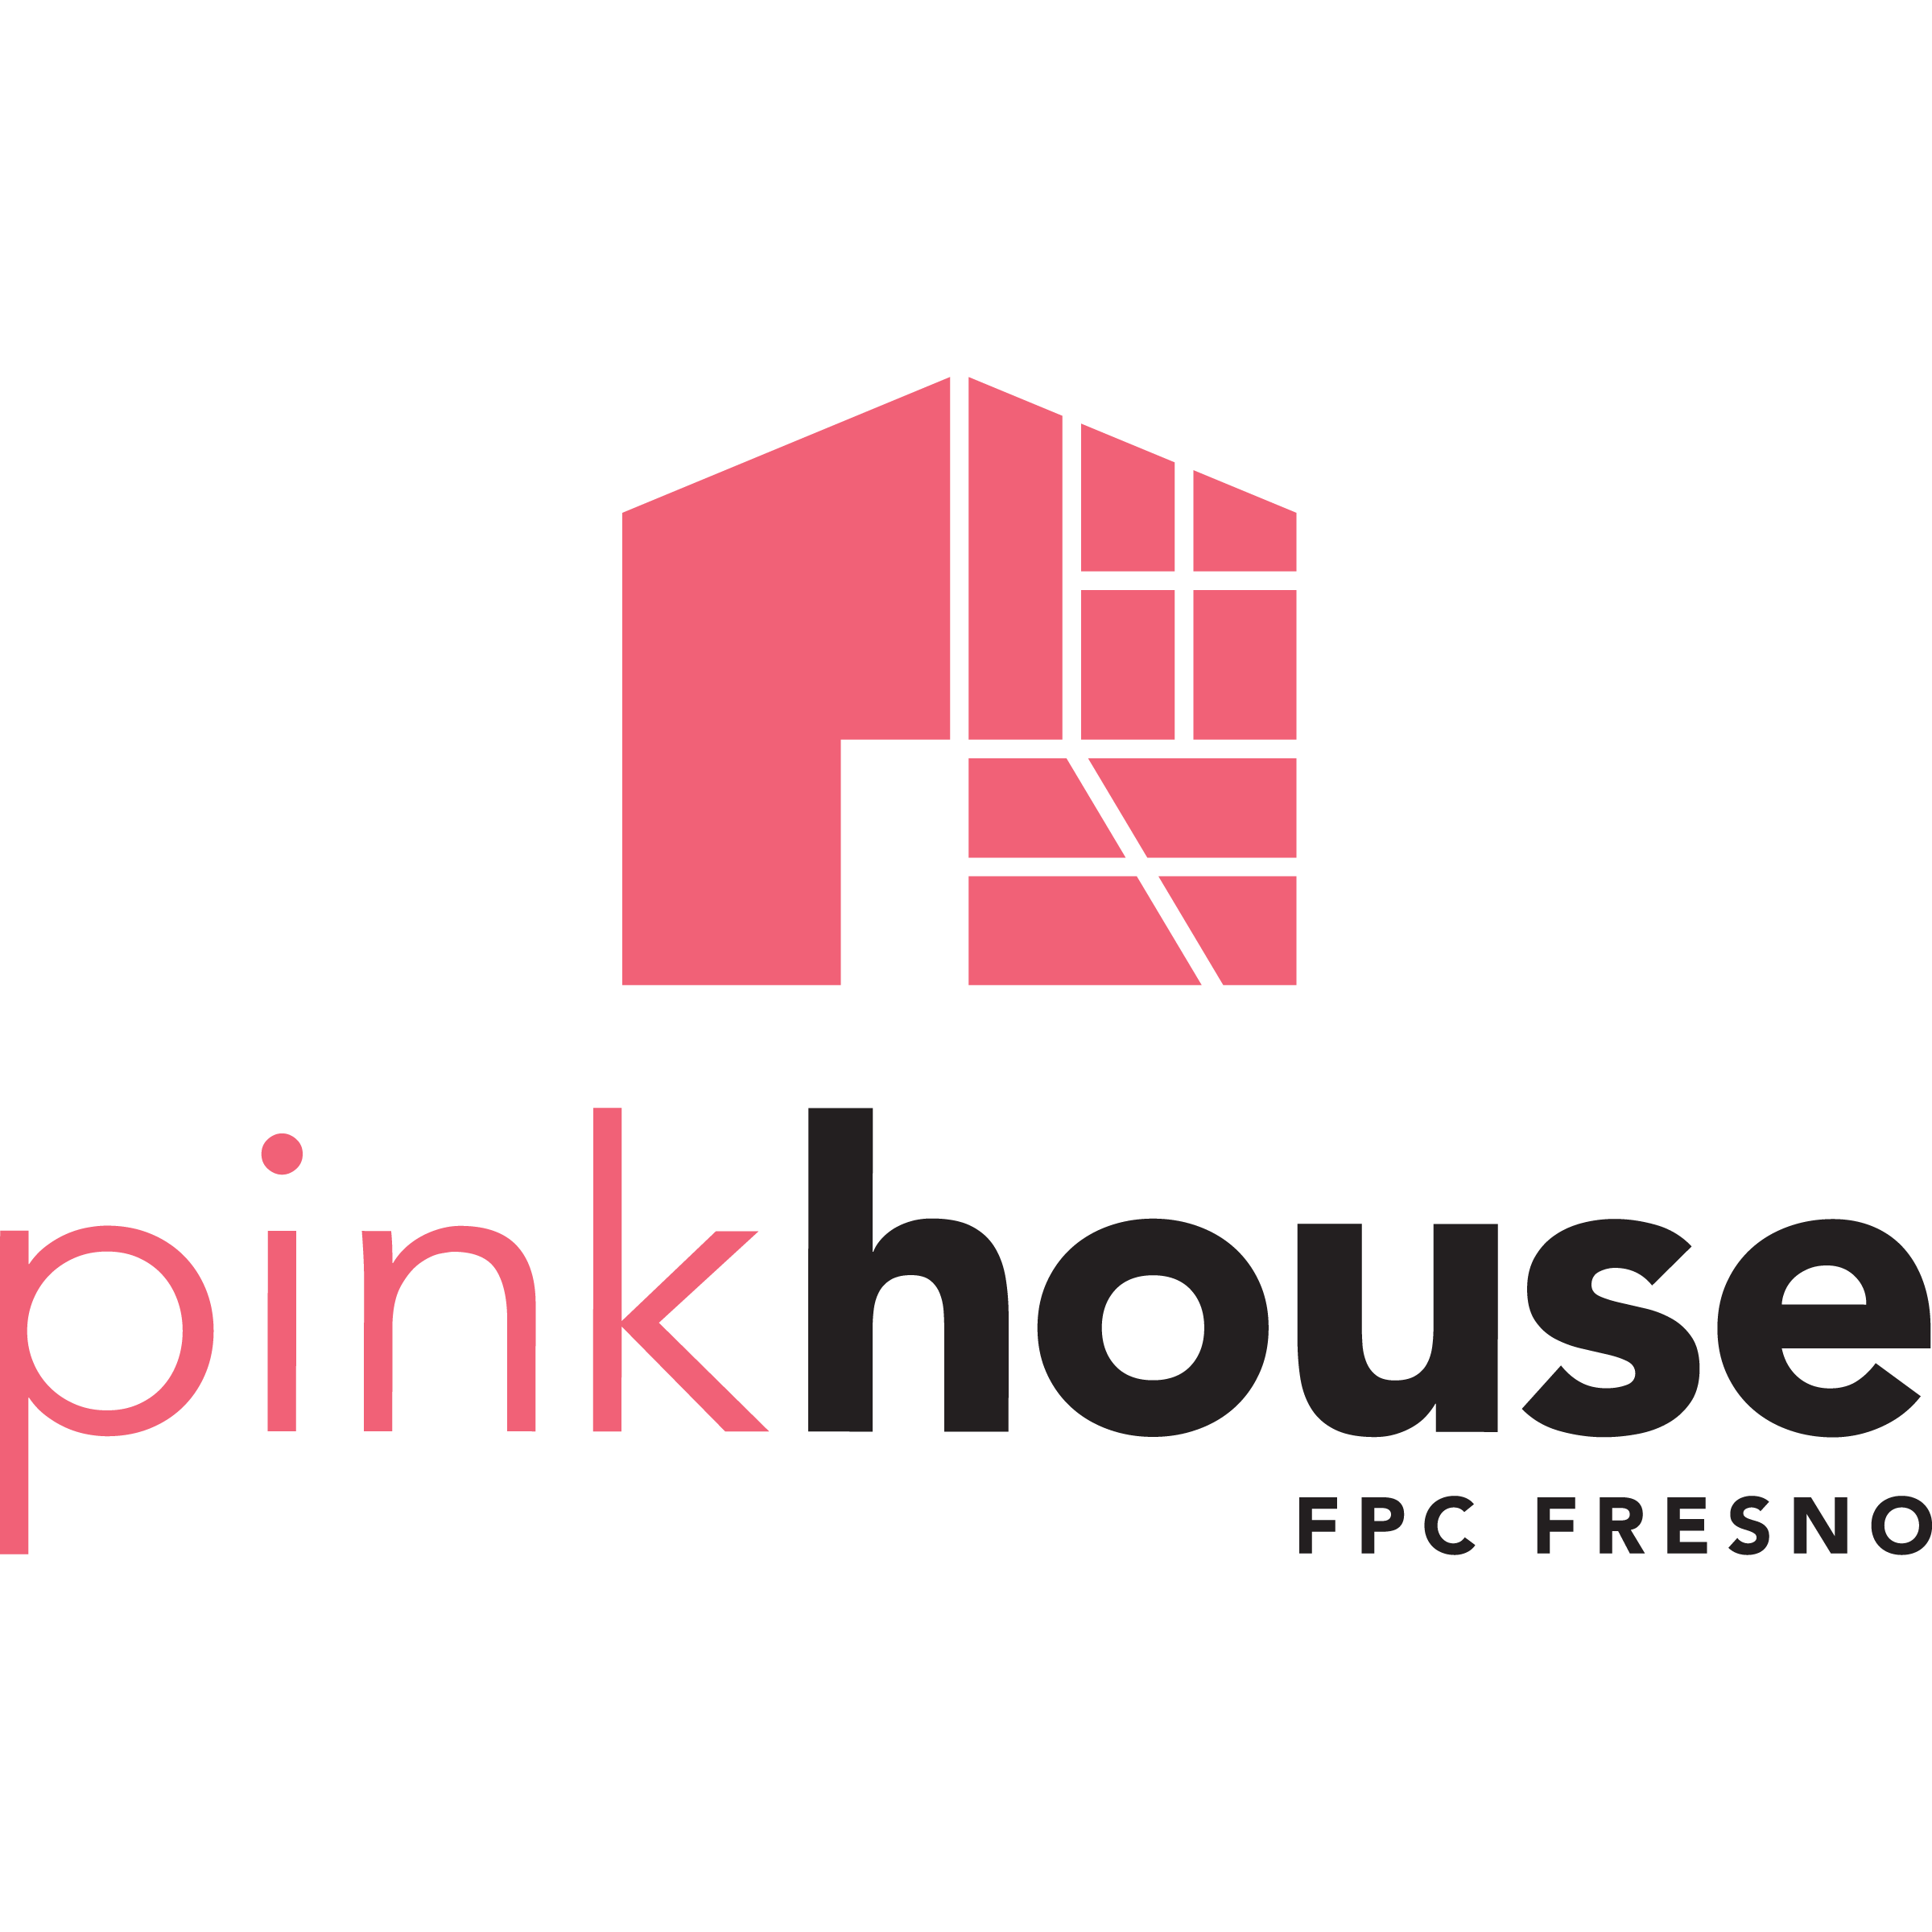 The Pink House Ministry Logo